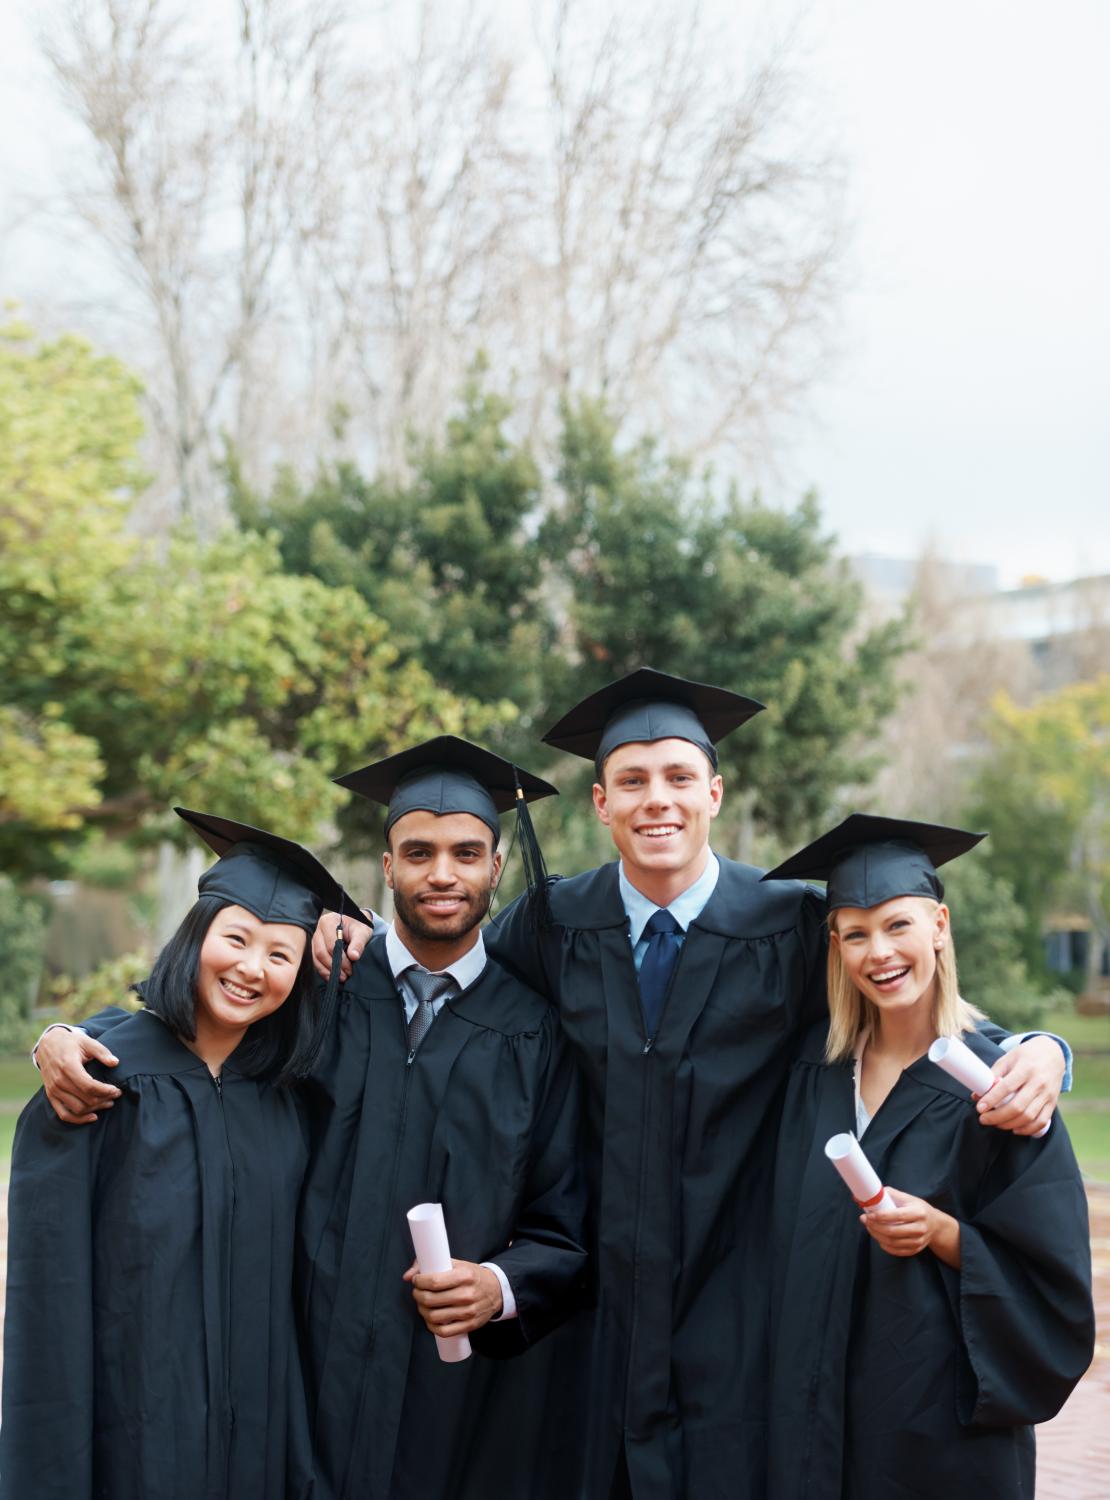 A group of college graduates standing in cap and gown and holding their diplomas